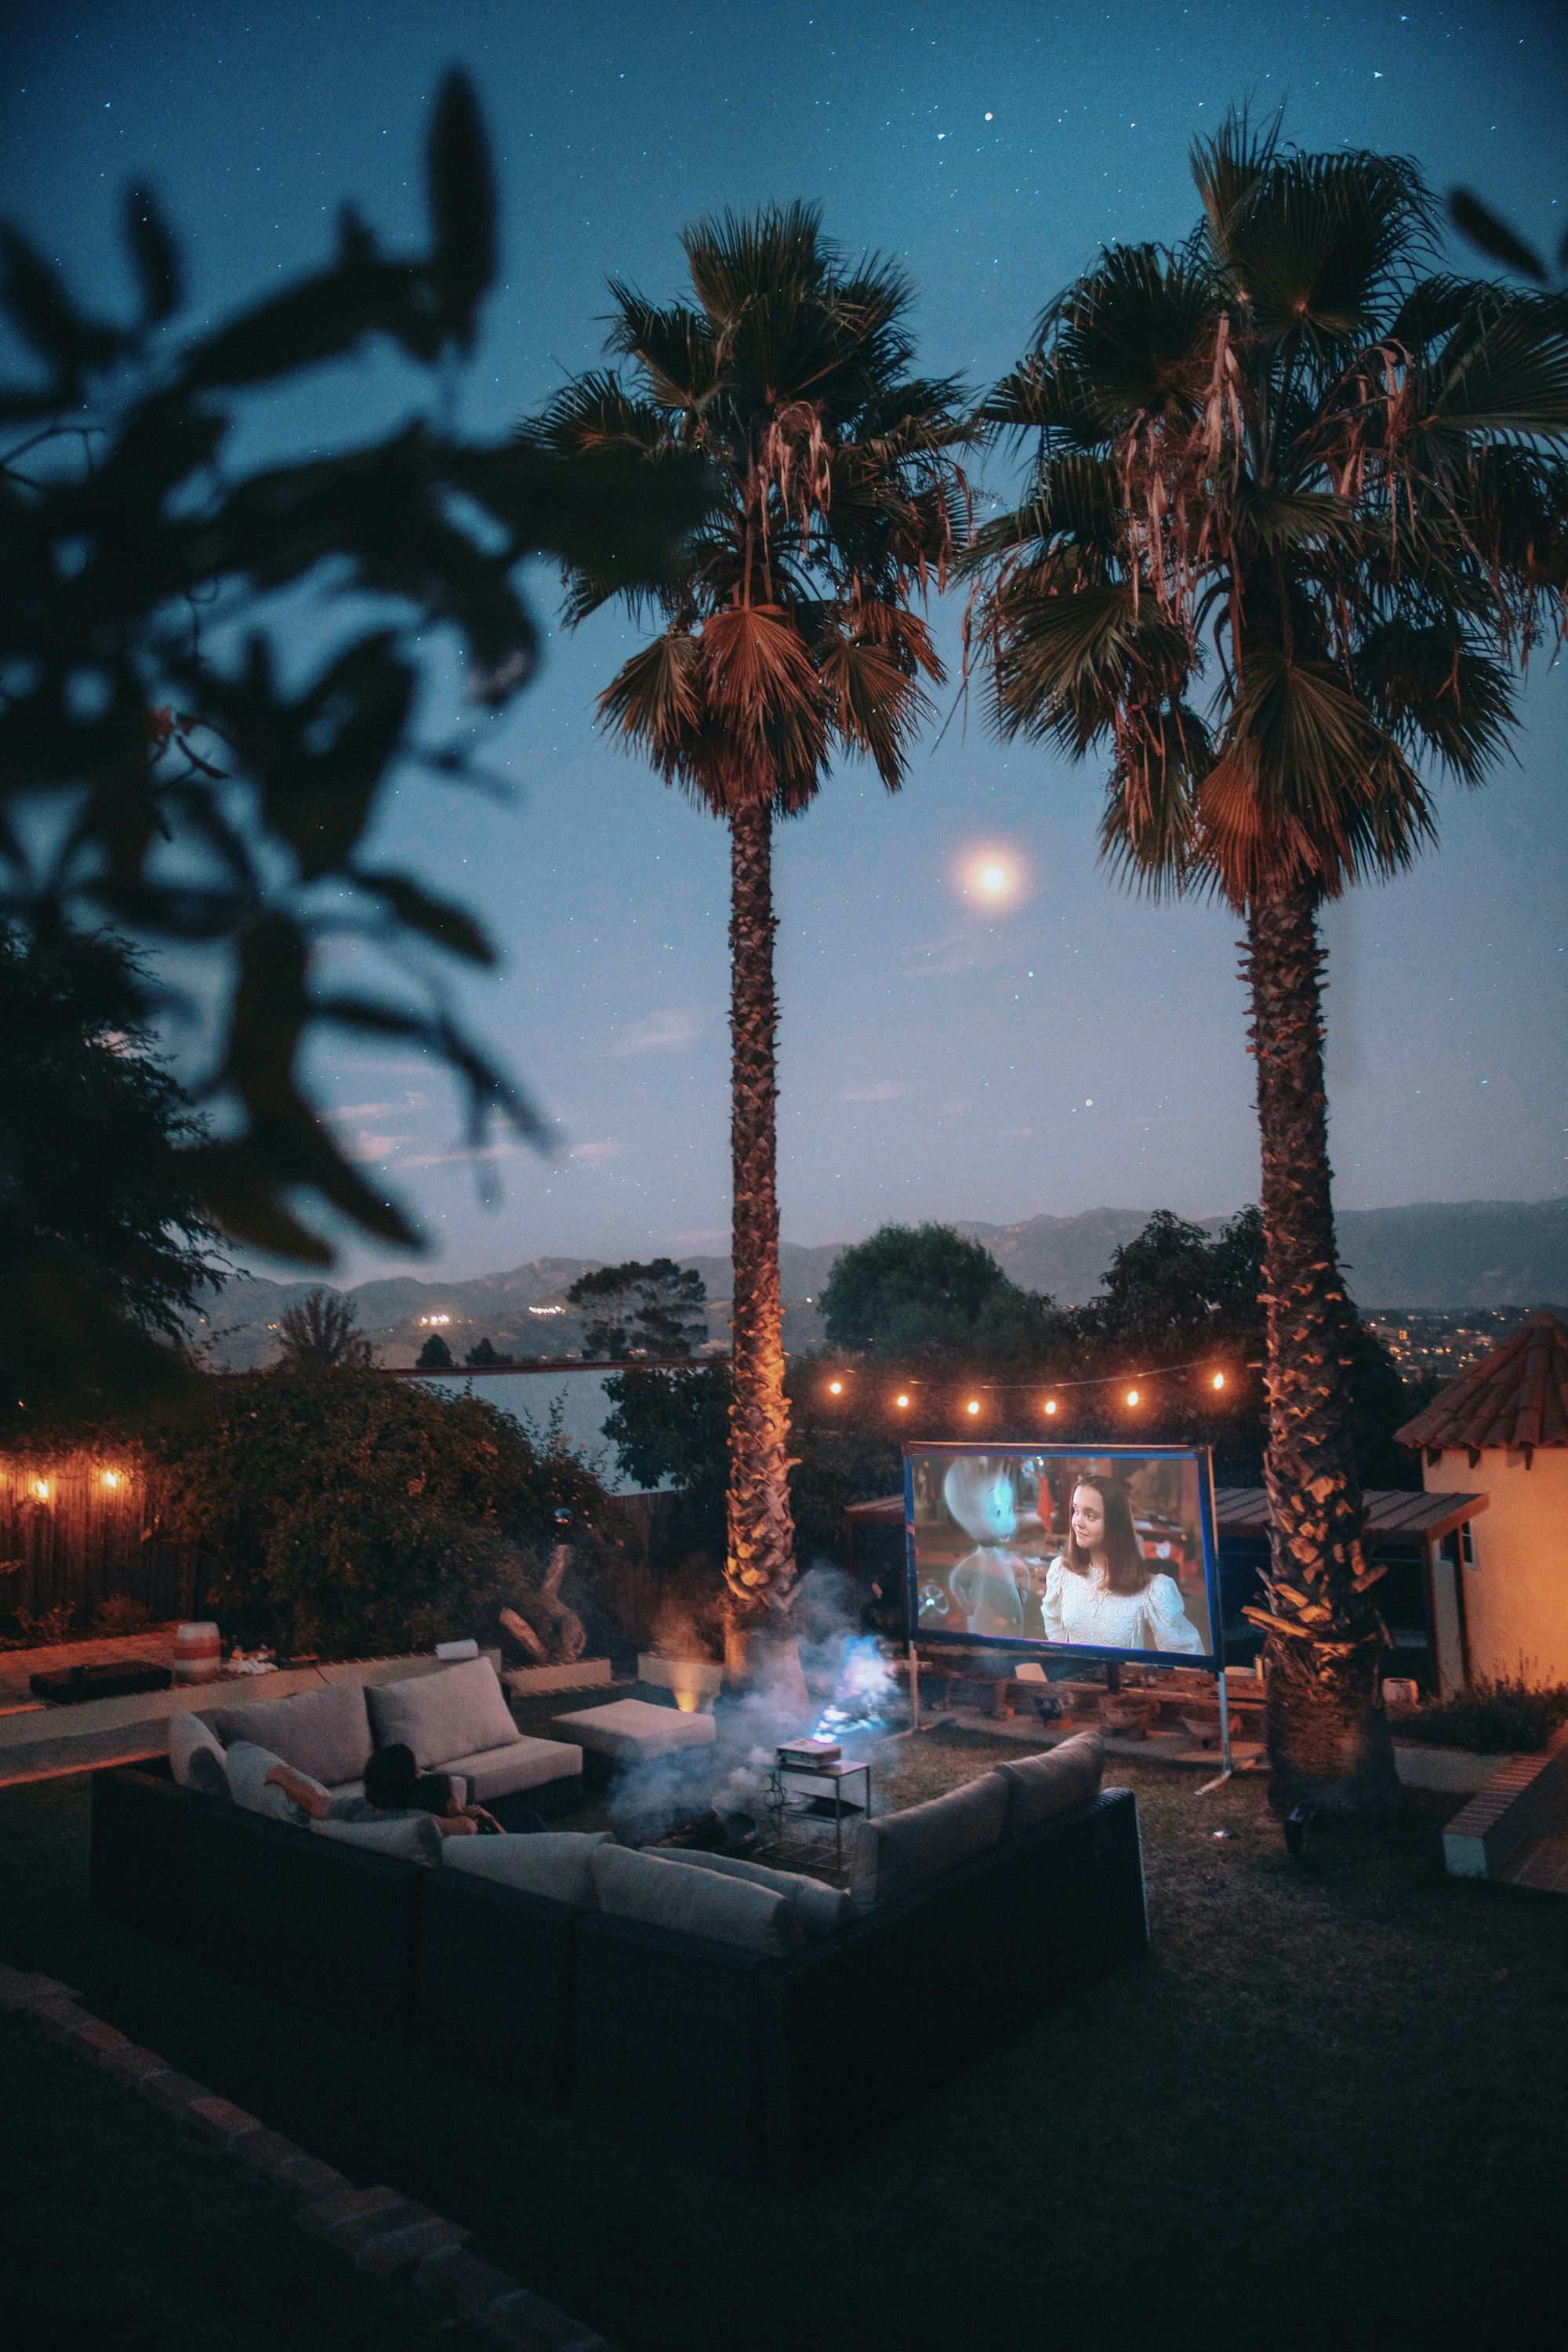 Outdoor movie night in Los Angeles.

If you find my photos useful, please consider subscribing to me on YouTube for the occasional photography tutorial and much more - https://bit.ly/3smVlKp - I'd greatly appreciate it!